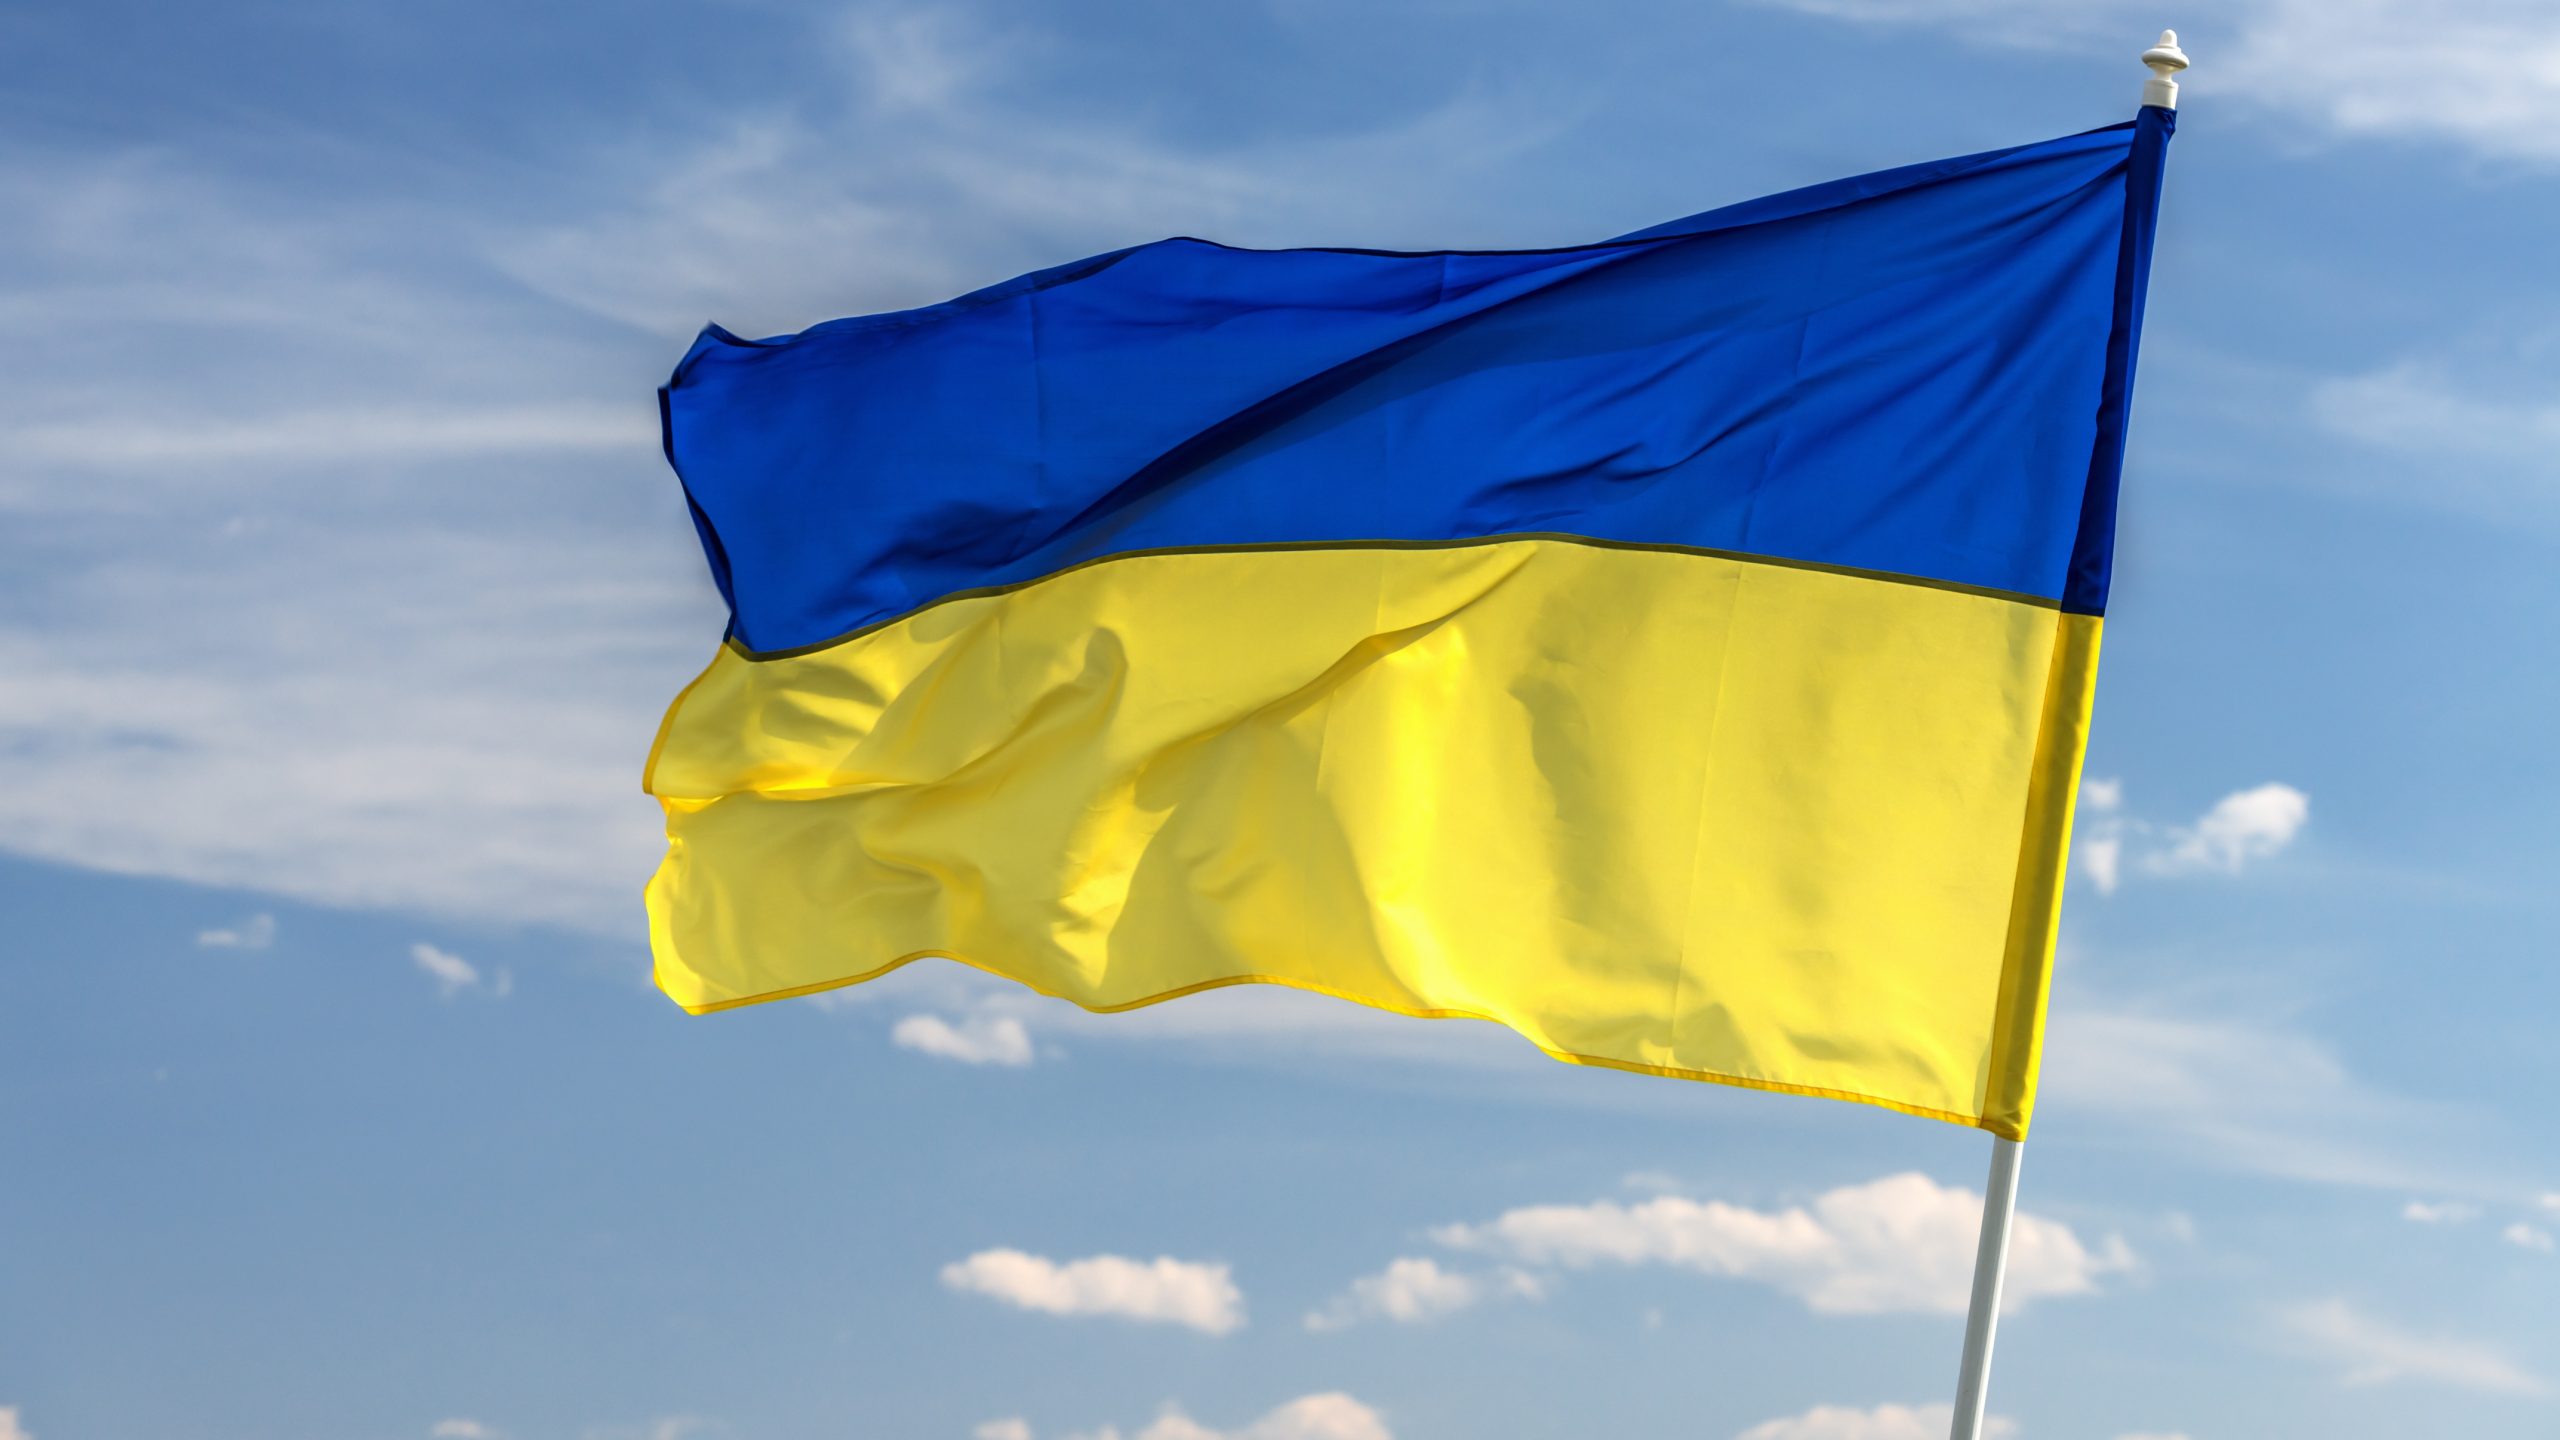 Governor Youngkin Stands with Ukraine, Calls for “Decisive Action”